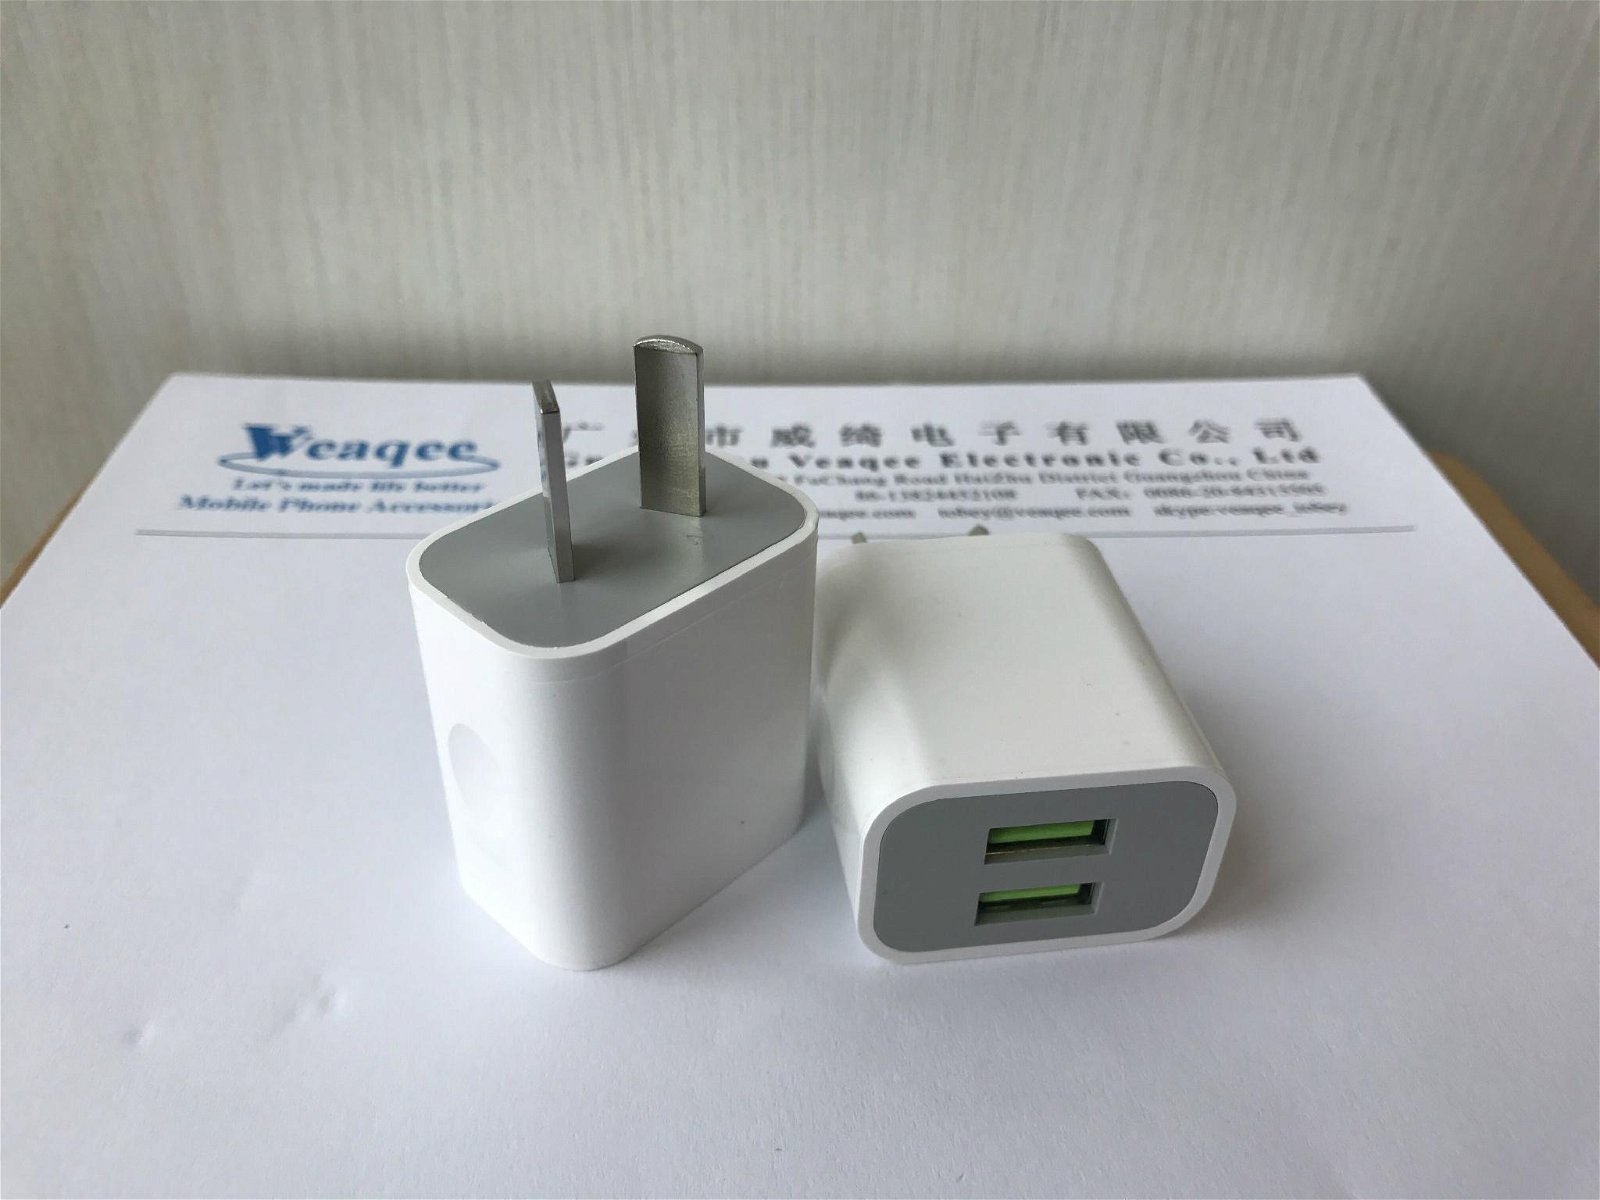 Argentina charger for Argentina plug 2a usb charger 2usb travel charger 3